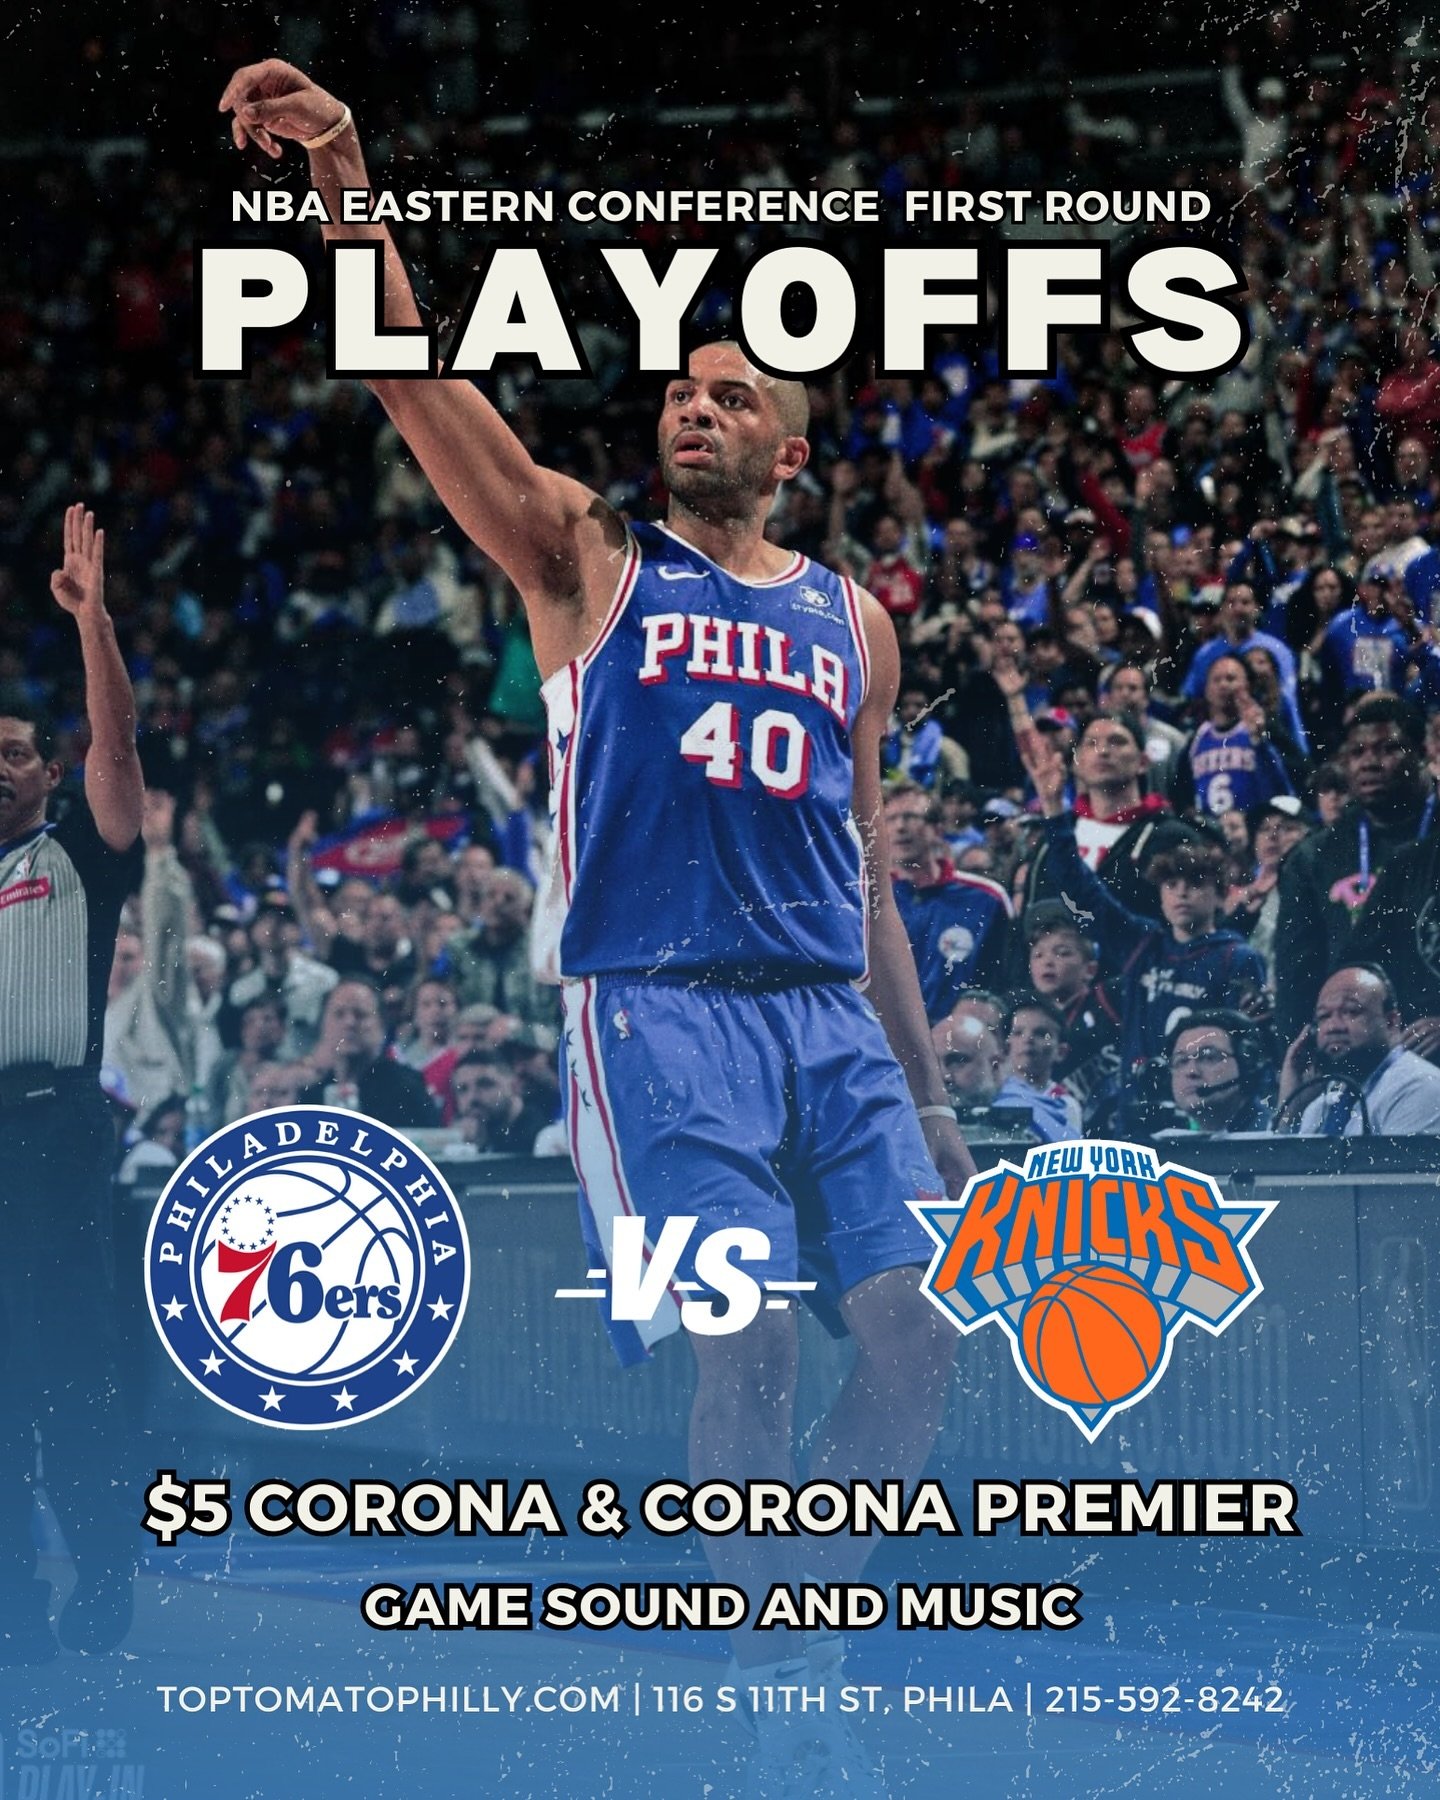 Gameday! @sixers Playoffs start tonight 6pm! Join us for all games! Game sound and music! $5 Coronas! 
-
Game 1 Sat 4/20 6pm 
Game 2 Mon 4/22 7:30pm 
Game 3 Thu 4/25 7:30pm 
Game 4 Sun 4/28 1pm
.
.
#sixers #philly #nba #nbaplayoffs #philadelphia #76e